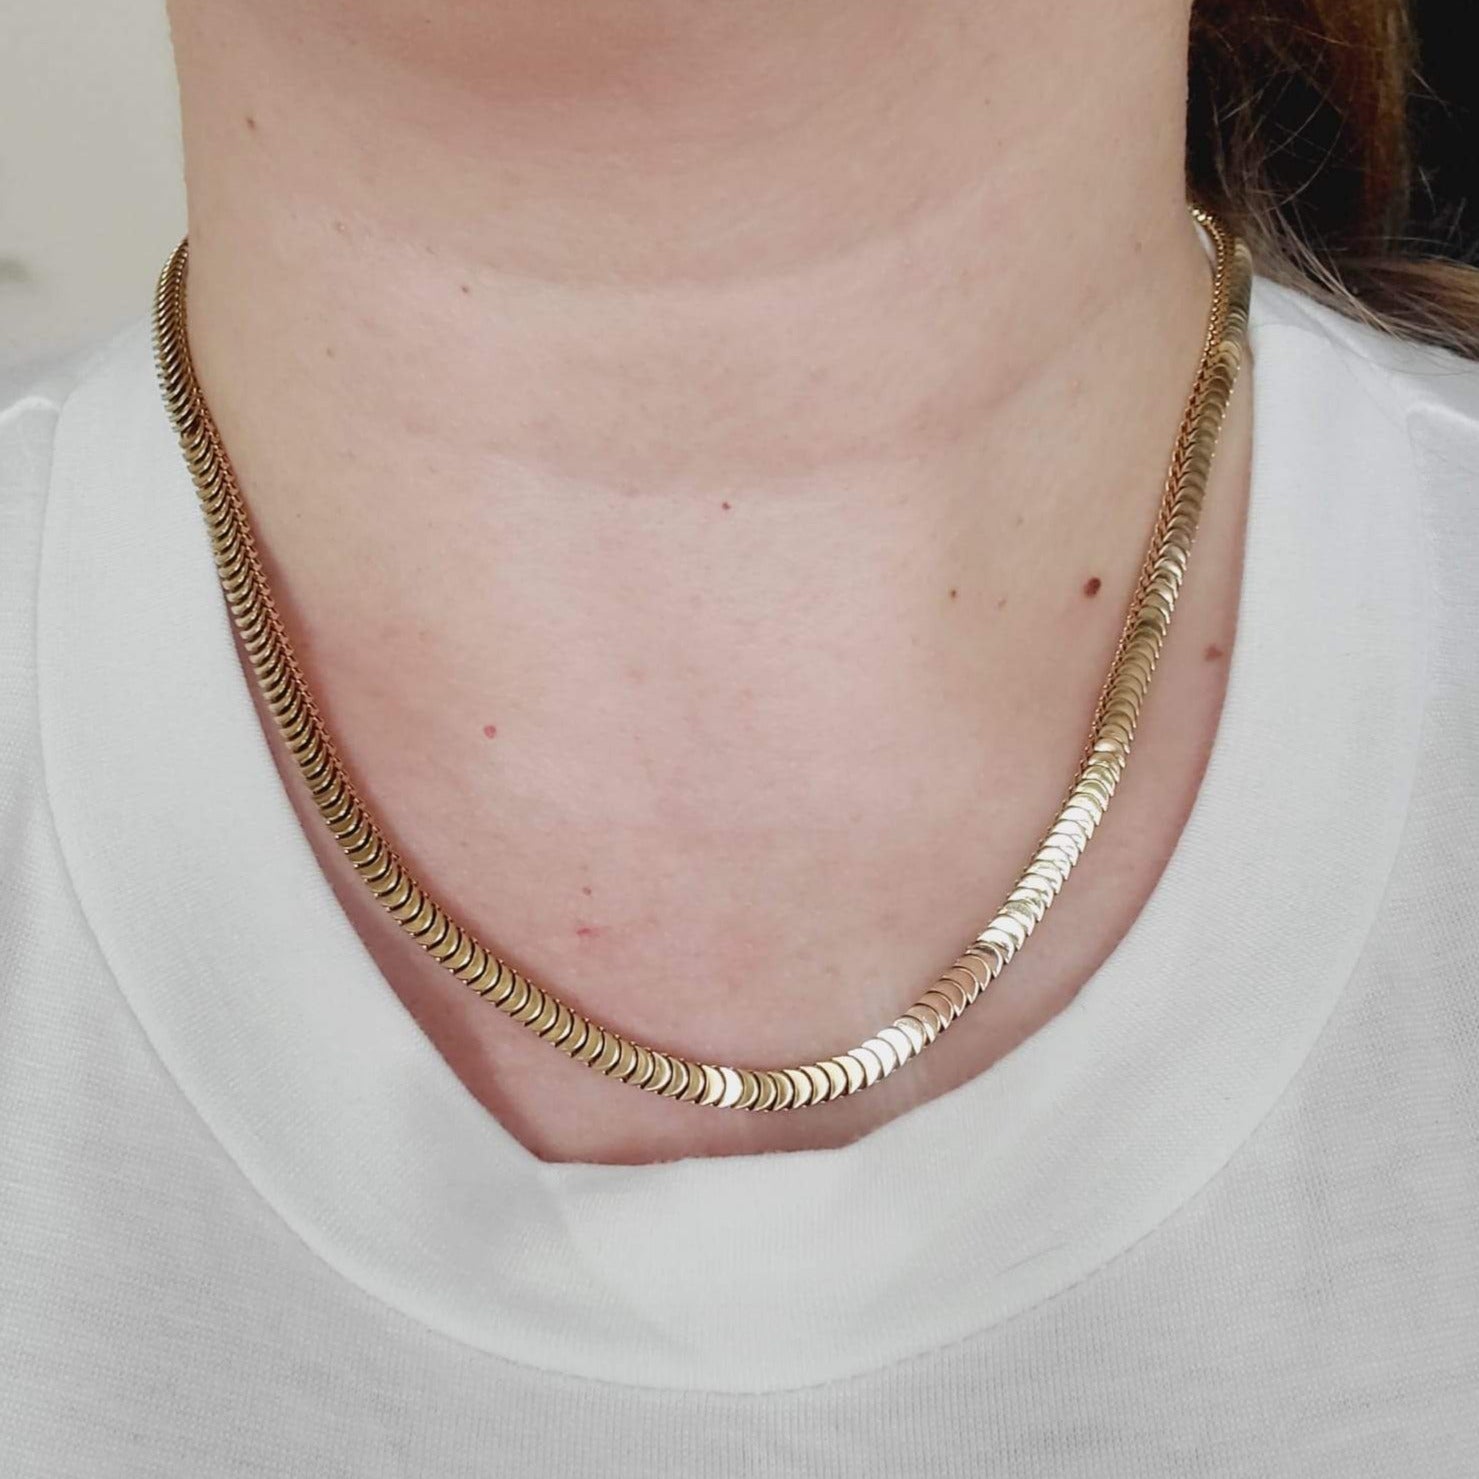 Water Resistant Necklace, Water Resistant Jewelry, Tarnish Free Jewelry, Tarnish Free Necklace, Snake Gold Necklace, Gold Snake Necklace, Hypoallergenic Necklace, Hey Harper Necklace, Ellie Vail Necklace, Missoma Jewelry